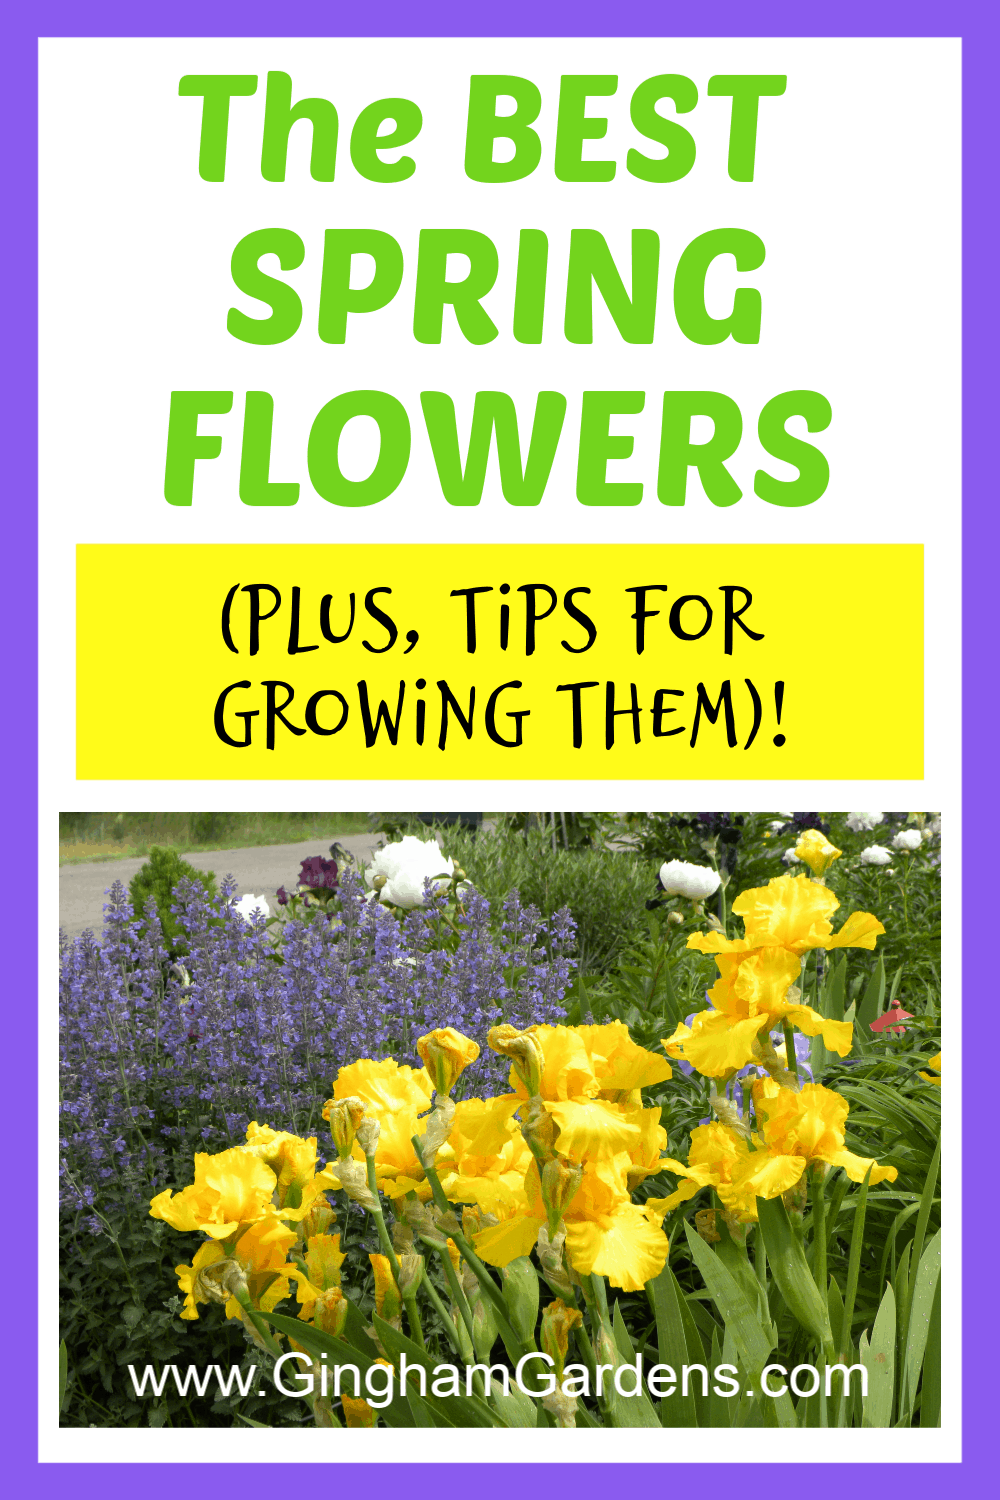 Image of Flowers with text overlay - The Best Spring Flowers and tips for growing them